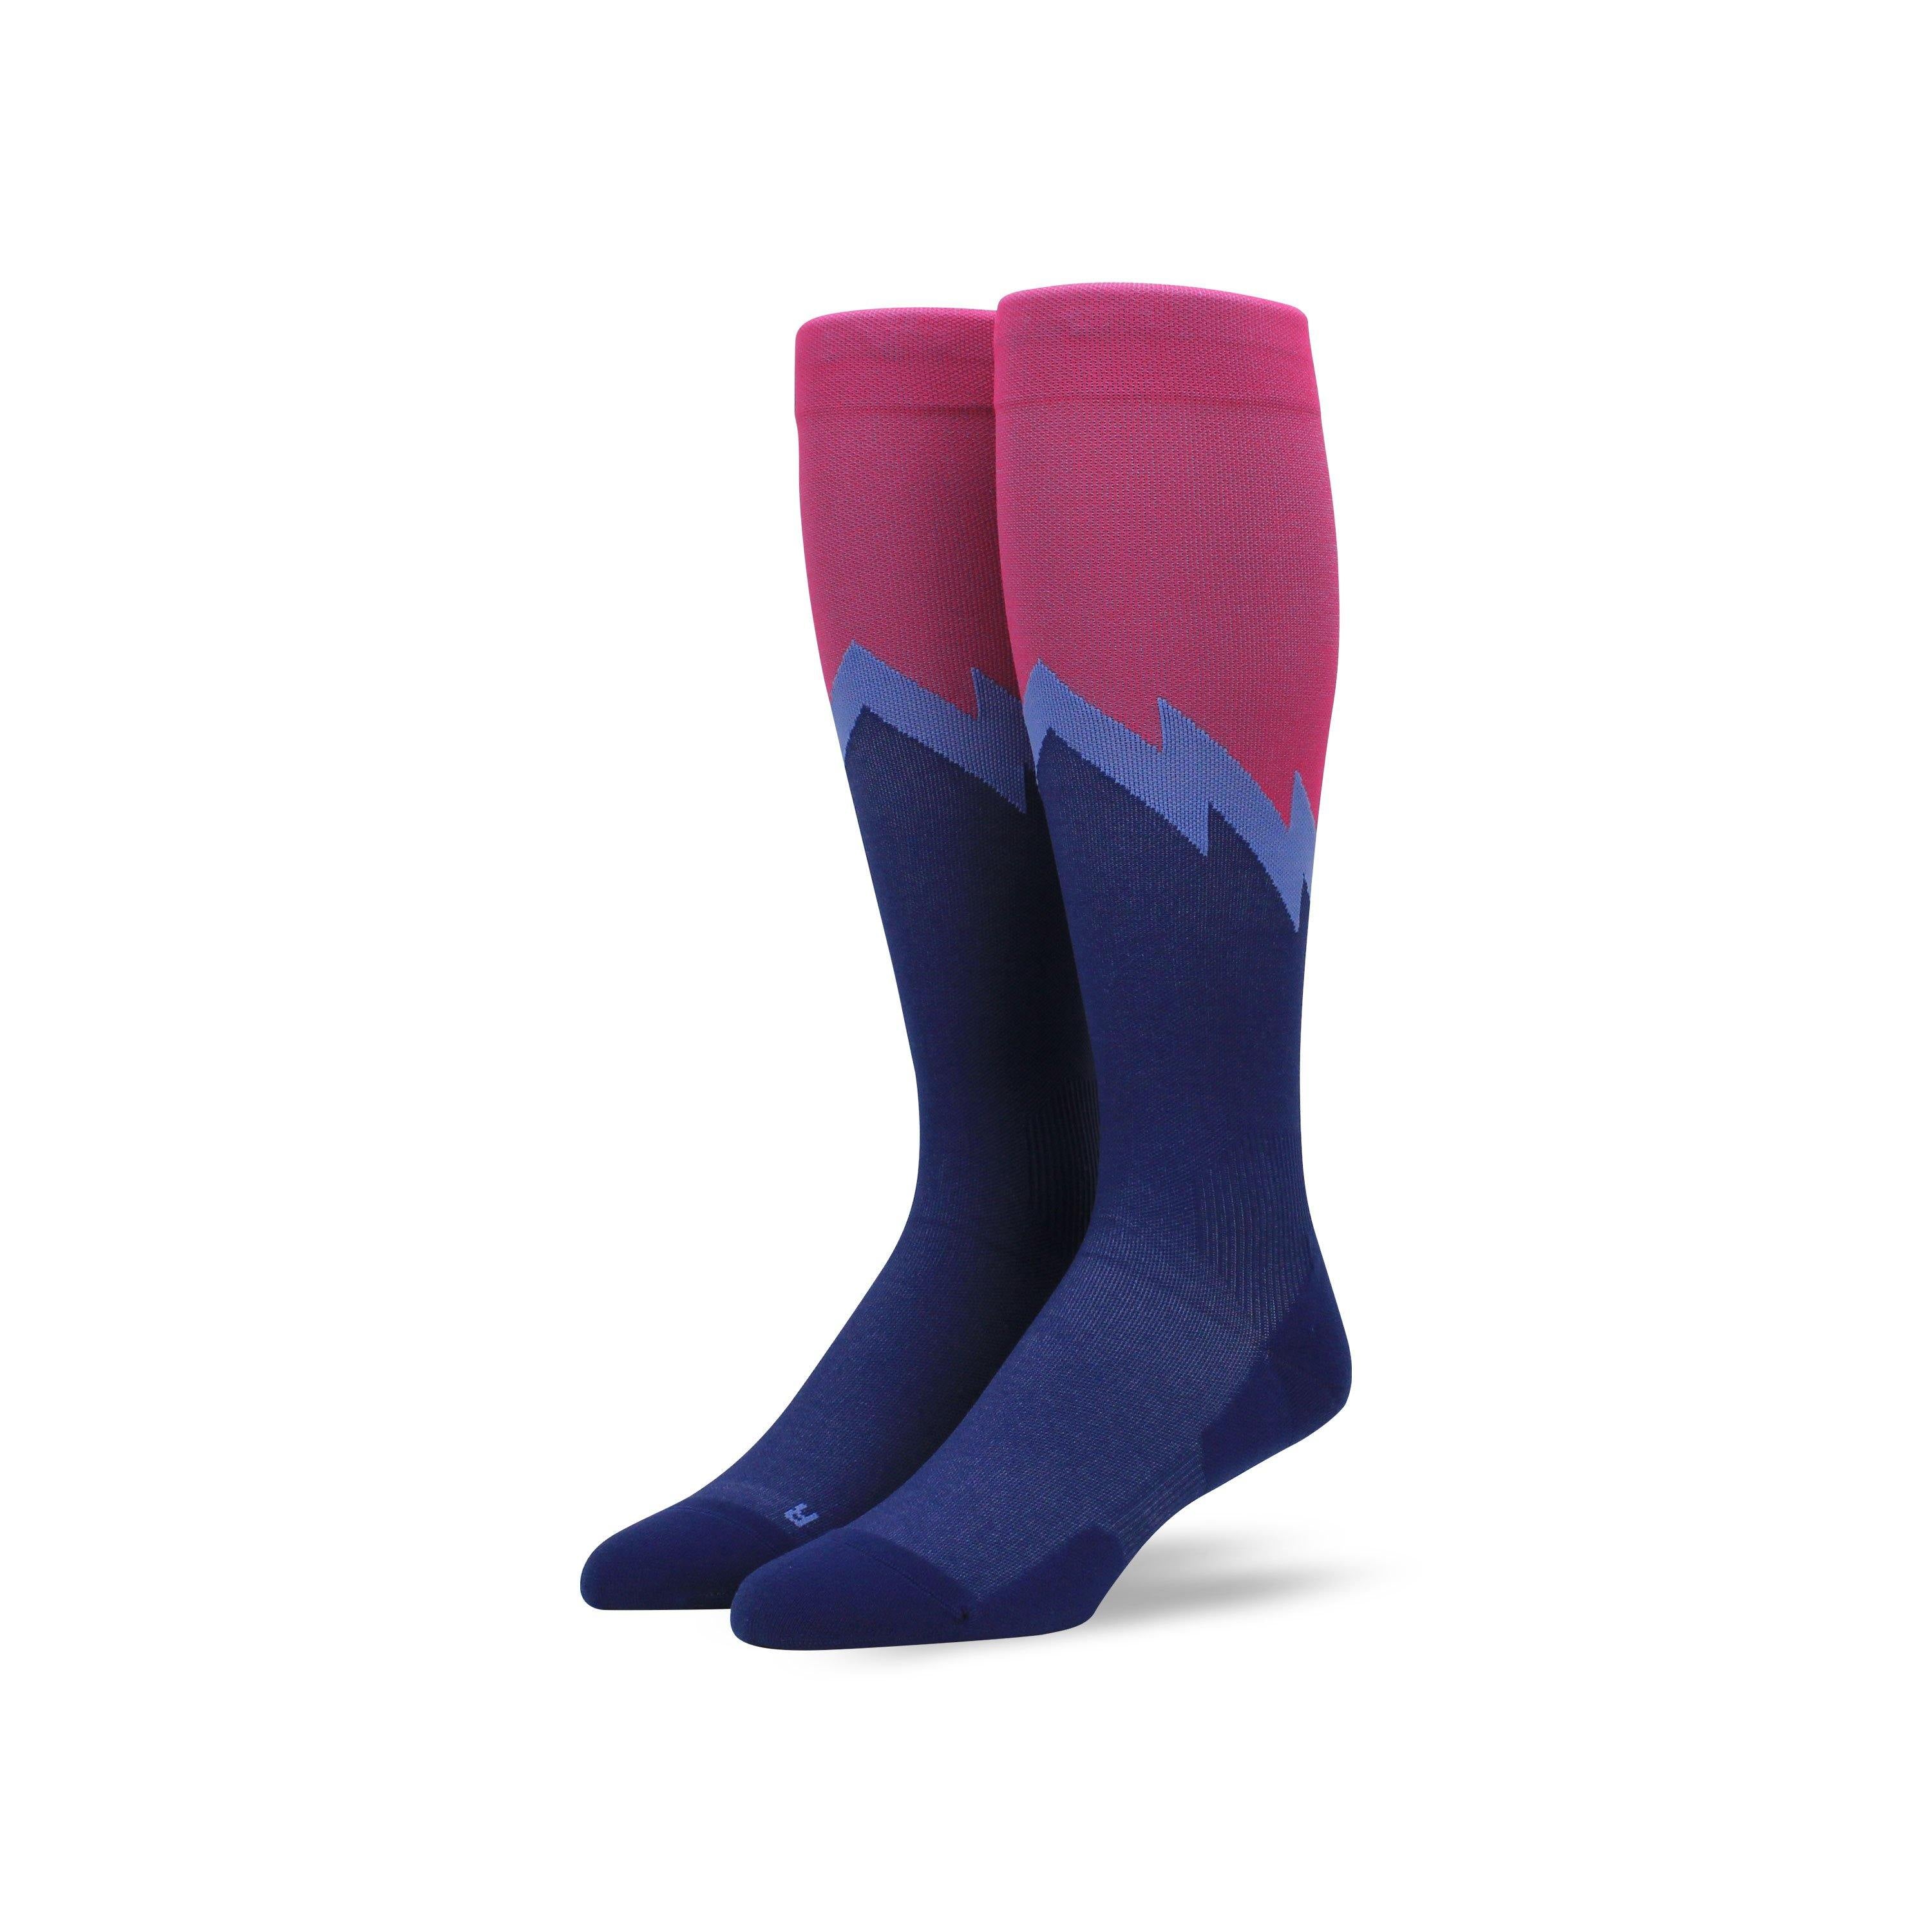 PRODUCT REVIEW: Skins compression socks are research supported as an ideal  aid to hockey performance - GO HOCKEY